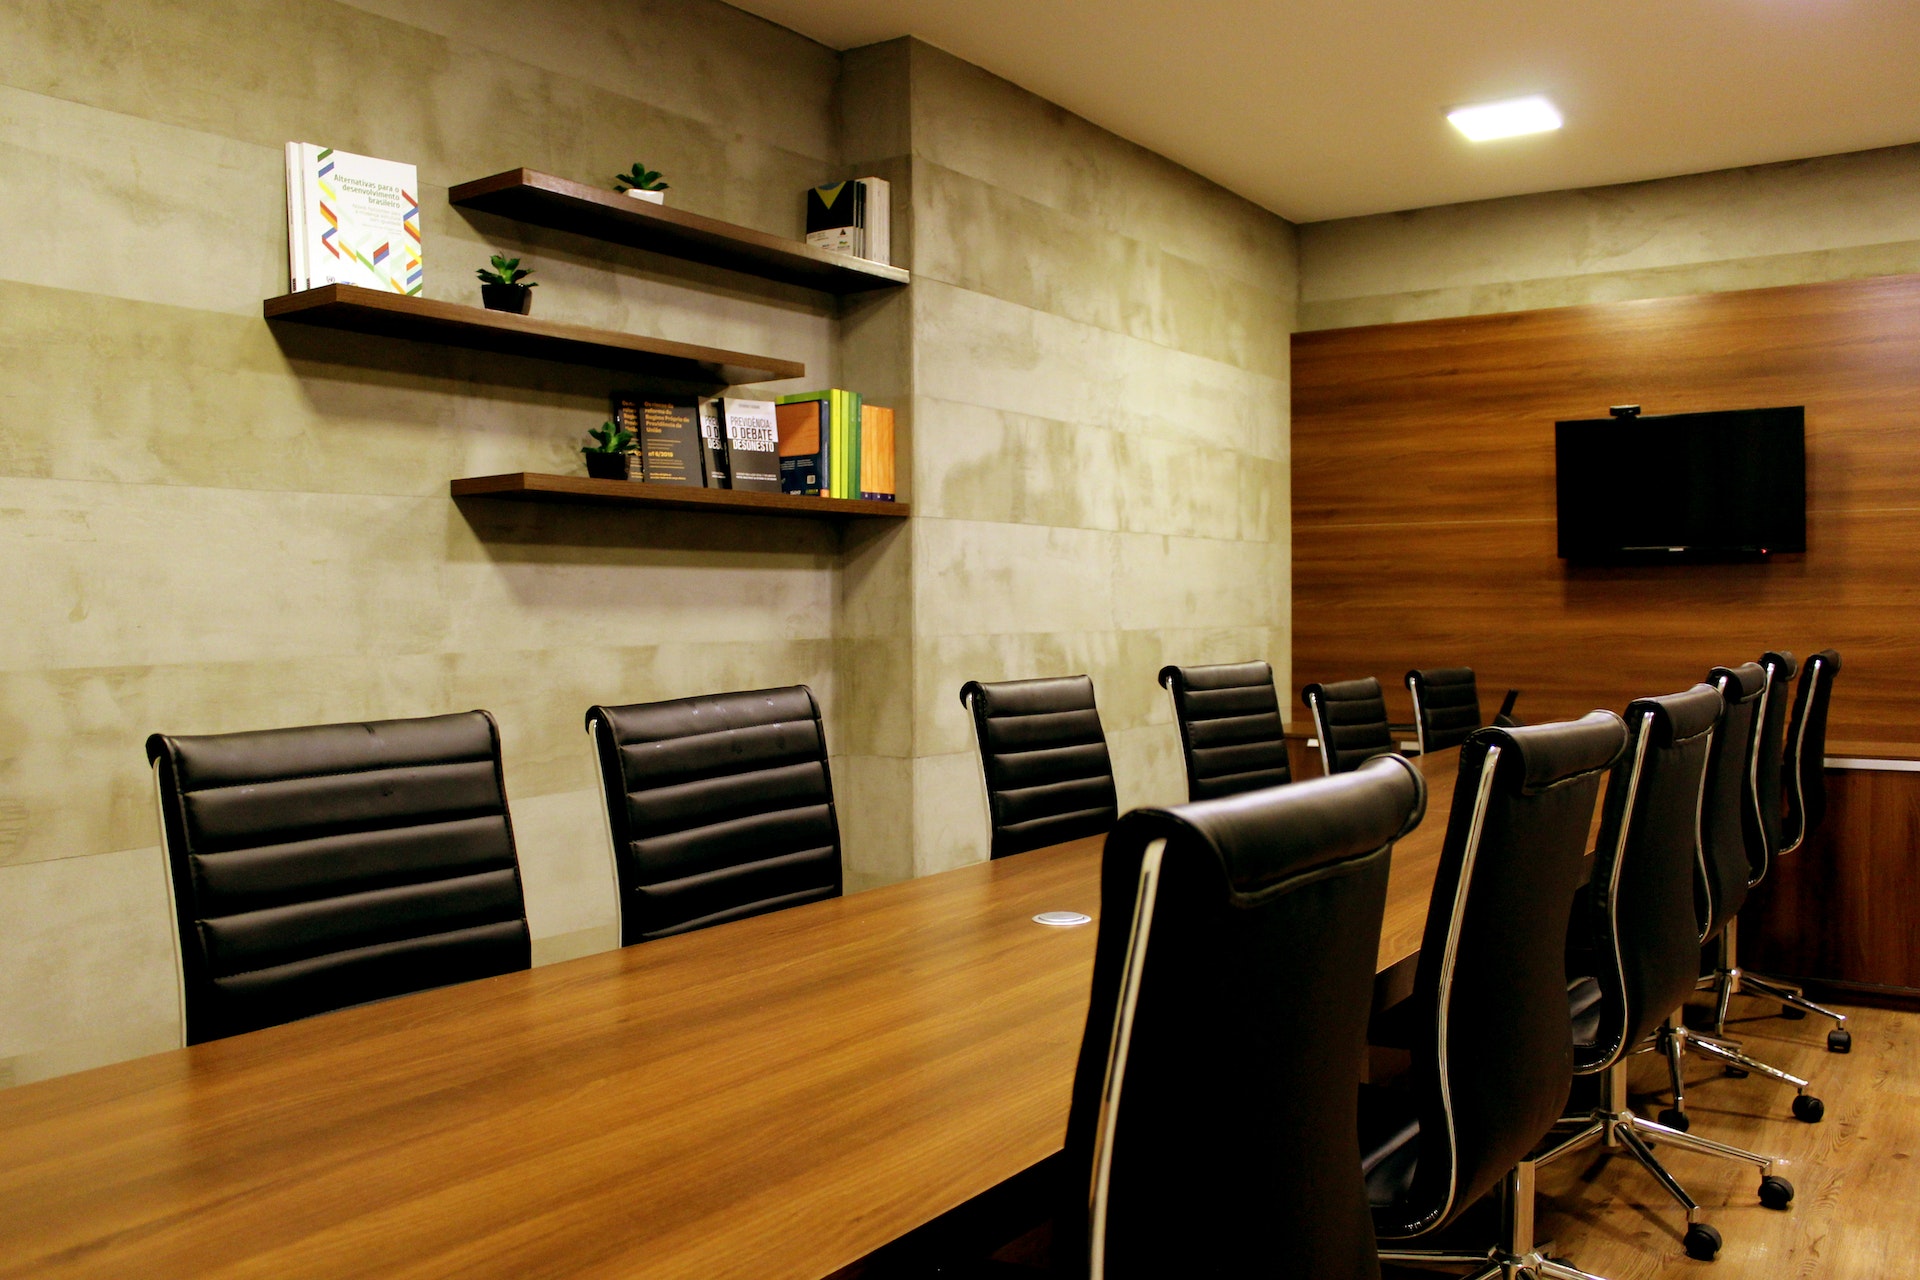 Boardroom with several leather backed chairs